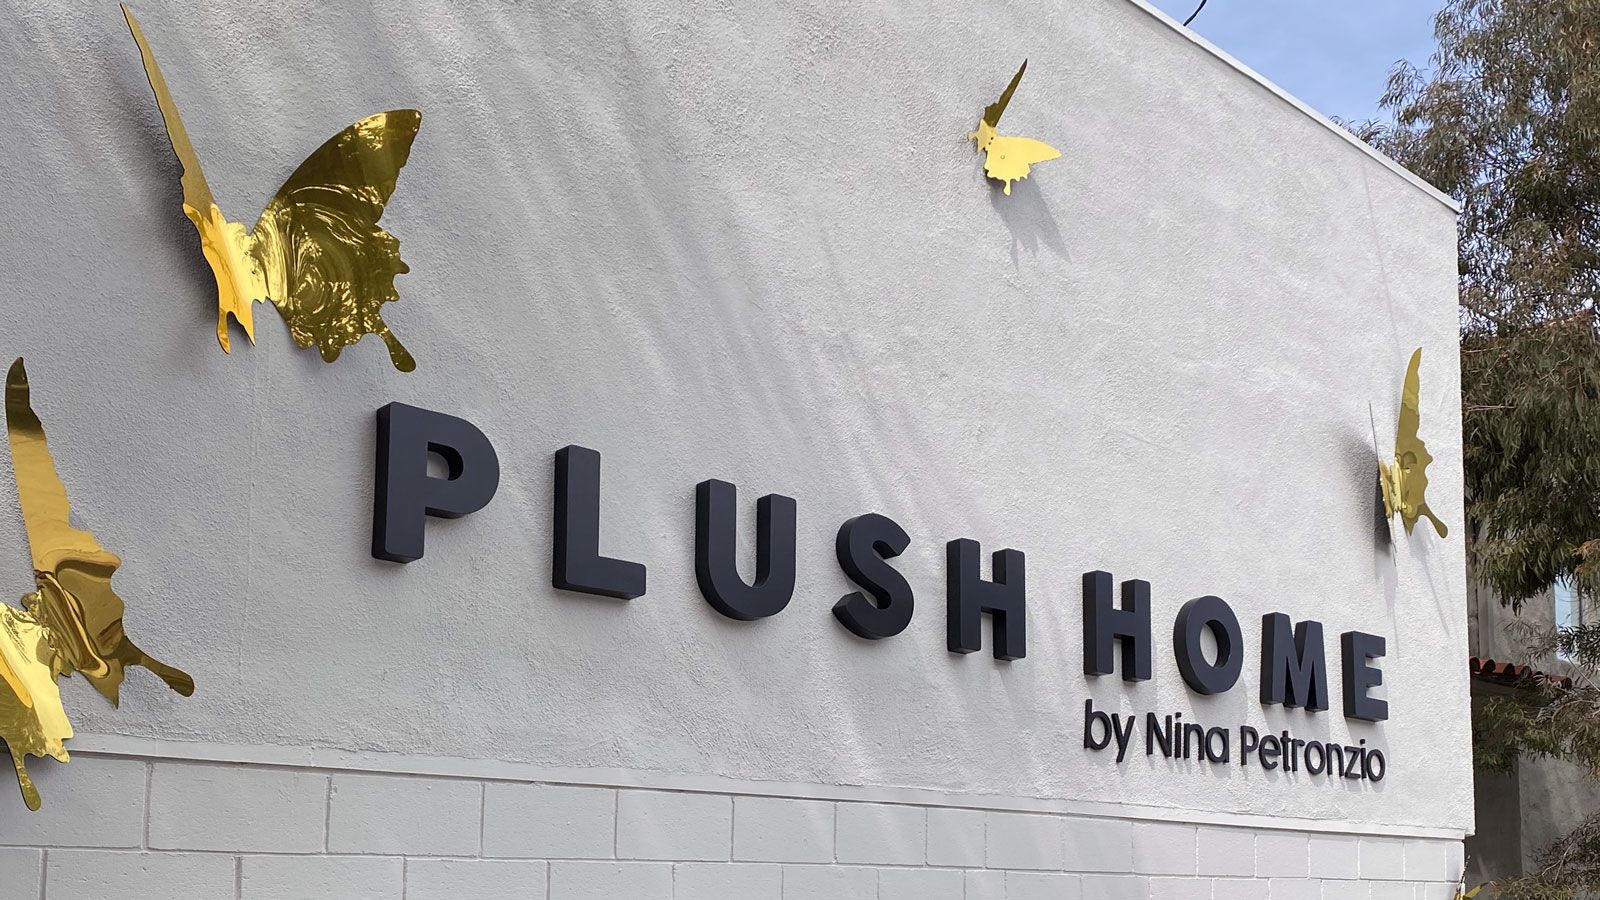 Plush Home custom 3d sign with golden decorative butterflies made of aluminum for branding